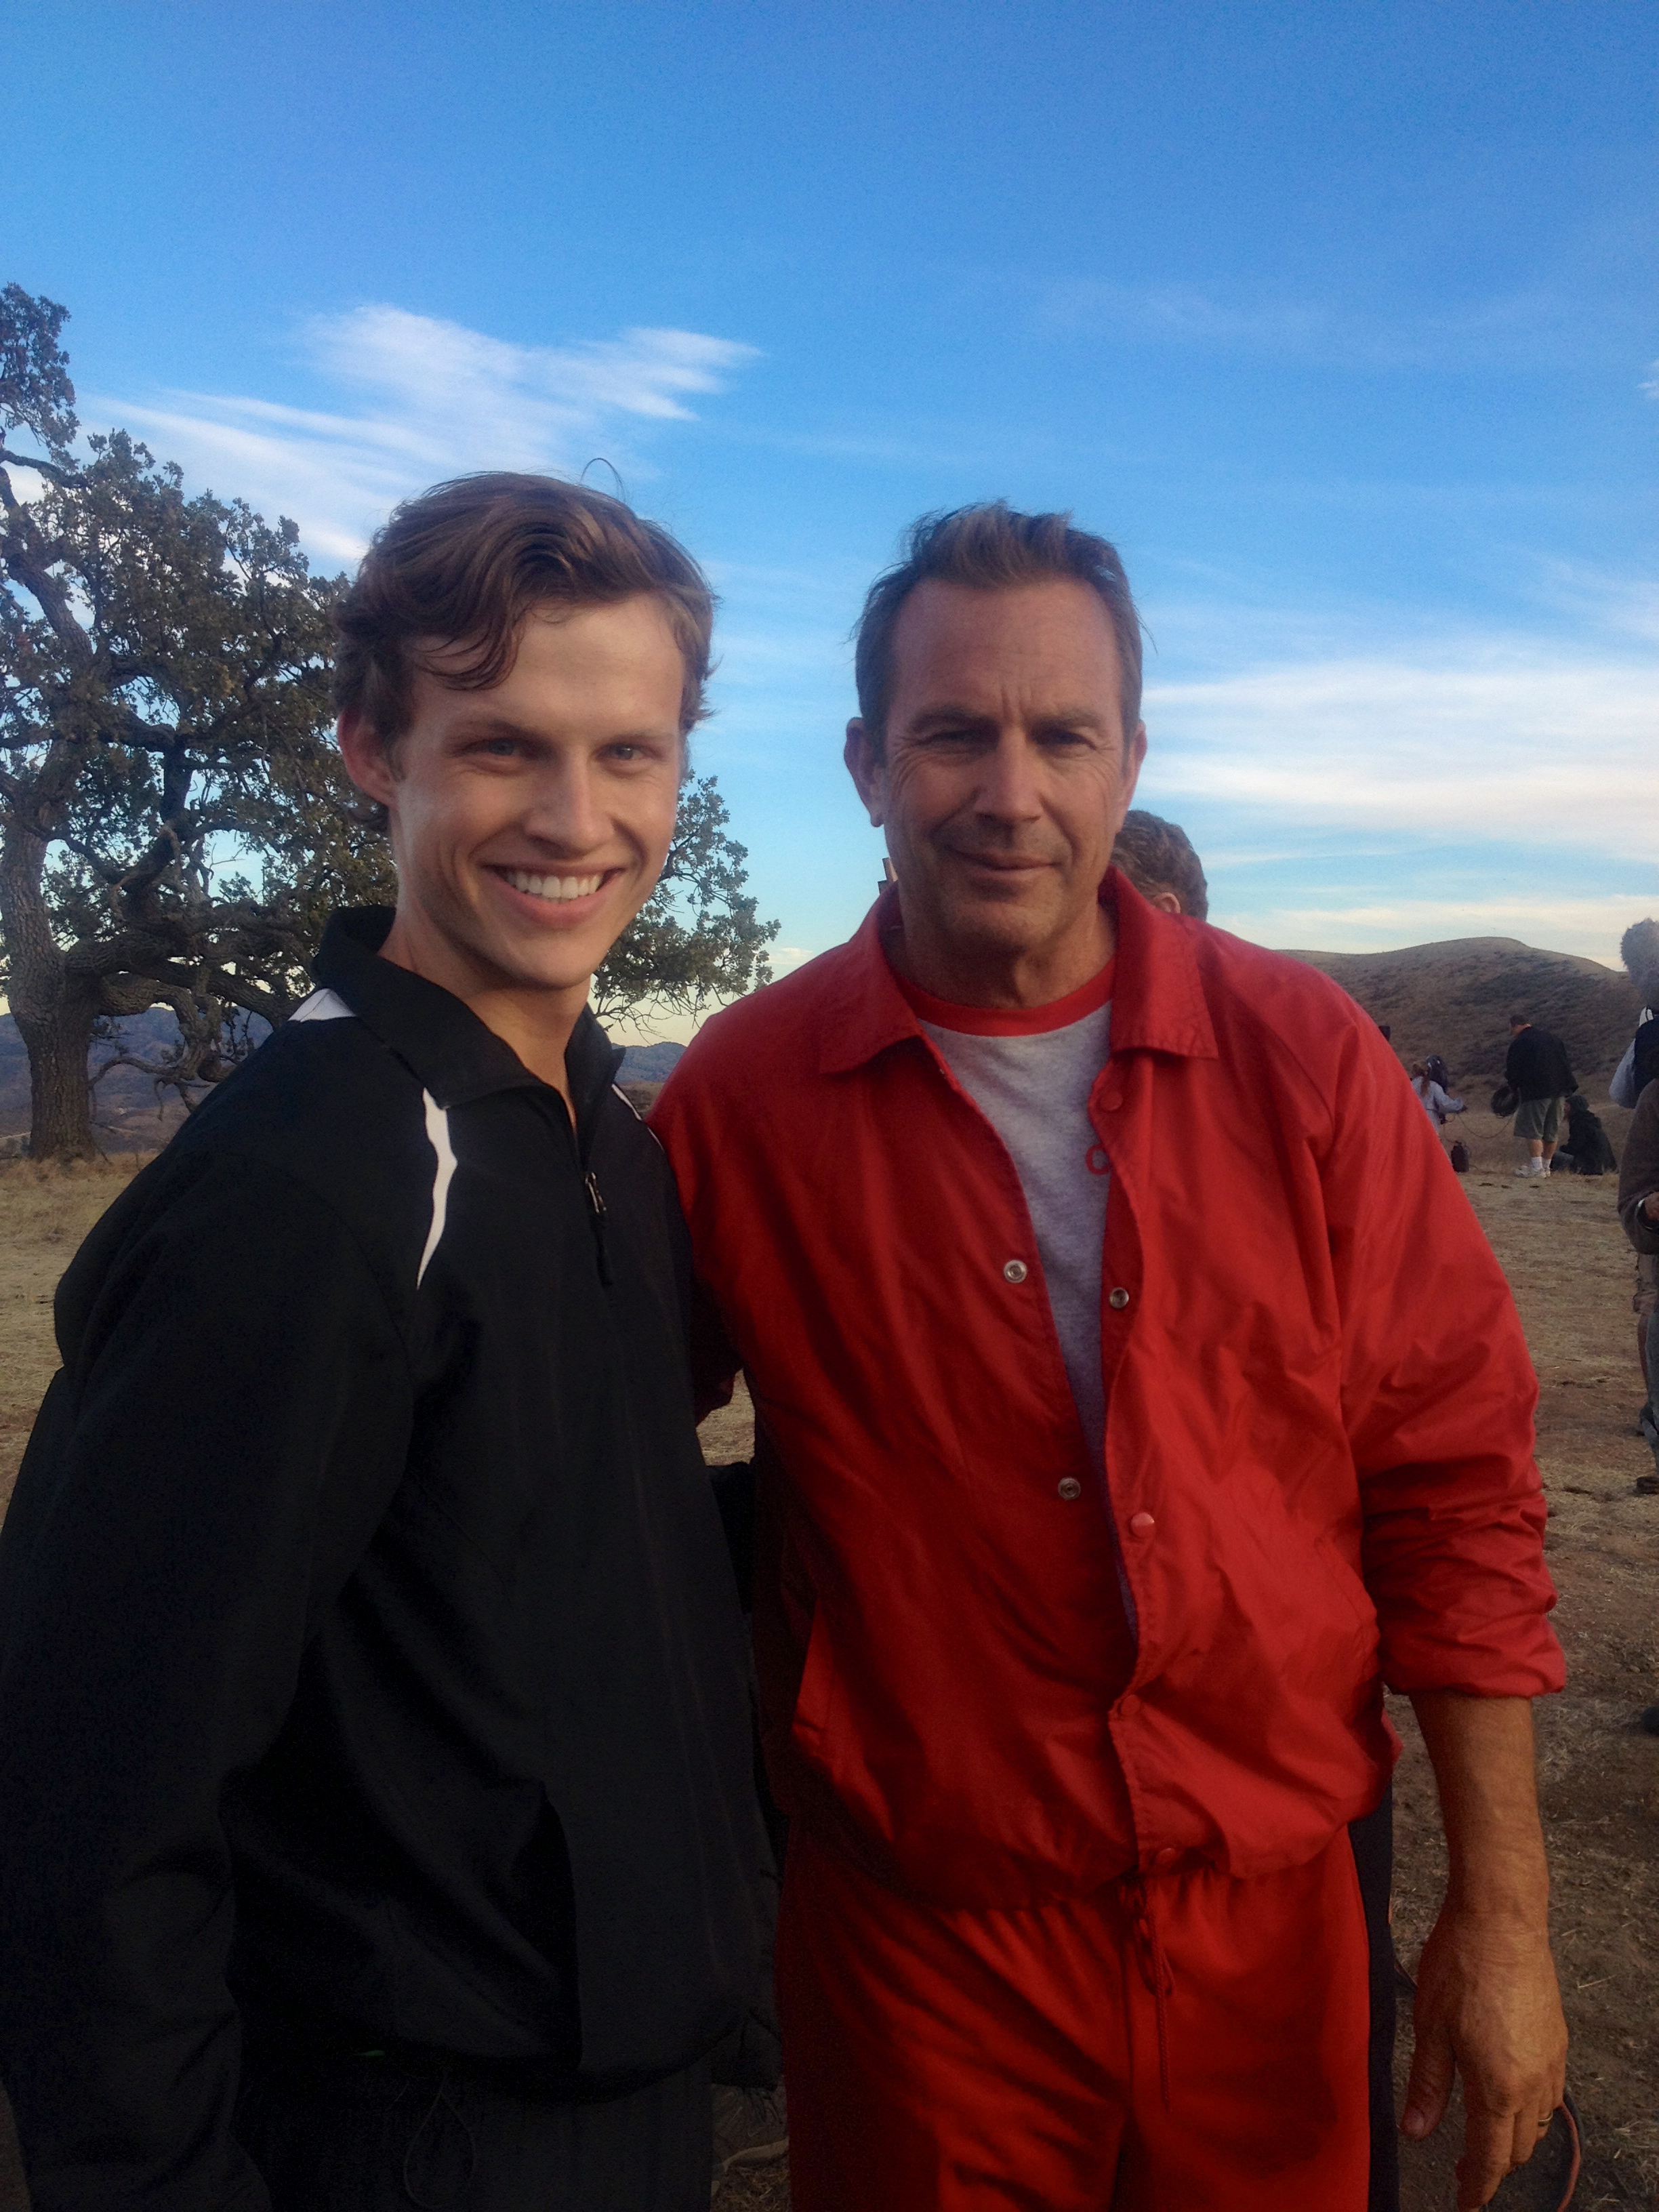 Connor Weil on the set of 'McFarland' starring Kevin Costner